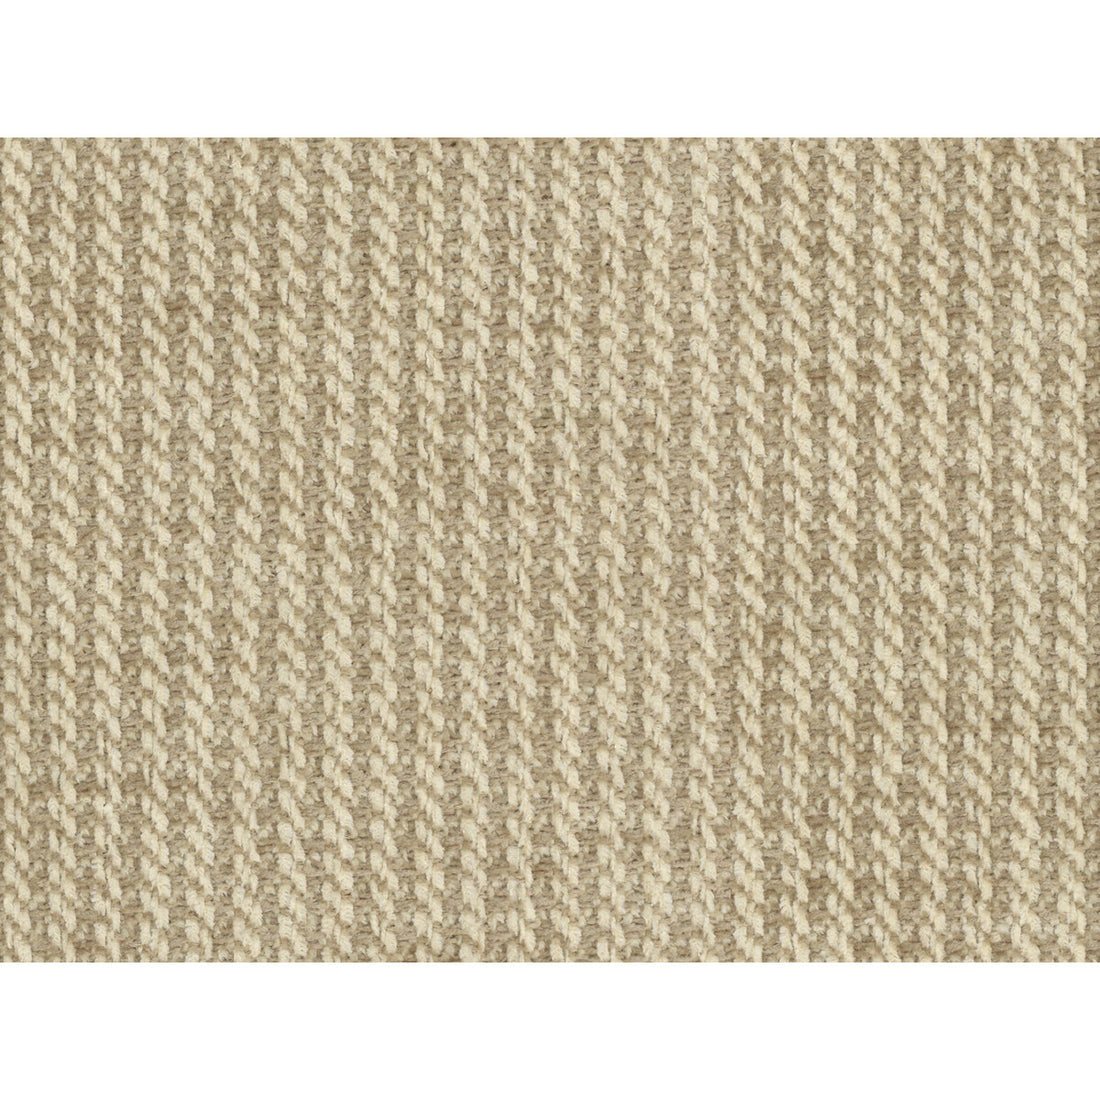 Granier Chenille fabric in sesame color - pattern 8016105.1116.0 - by Brunschwig &amp; Fils in the Chambery Textures collection